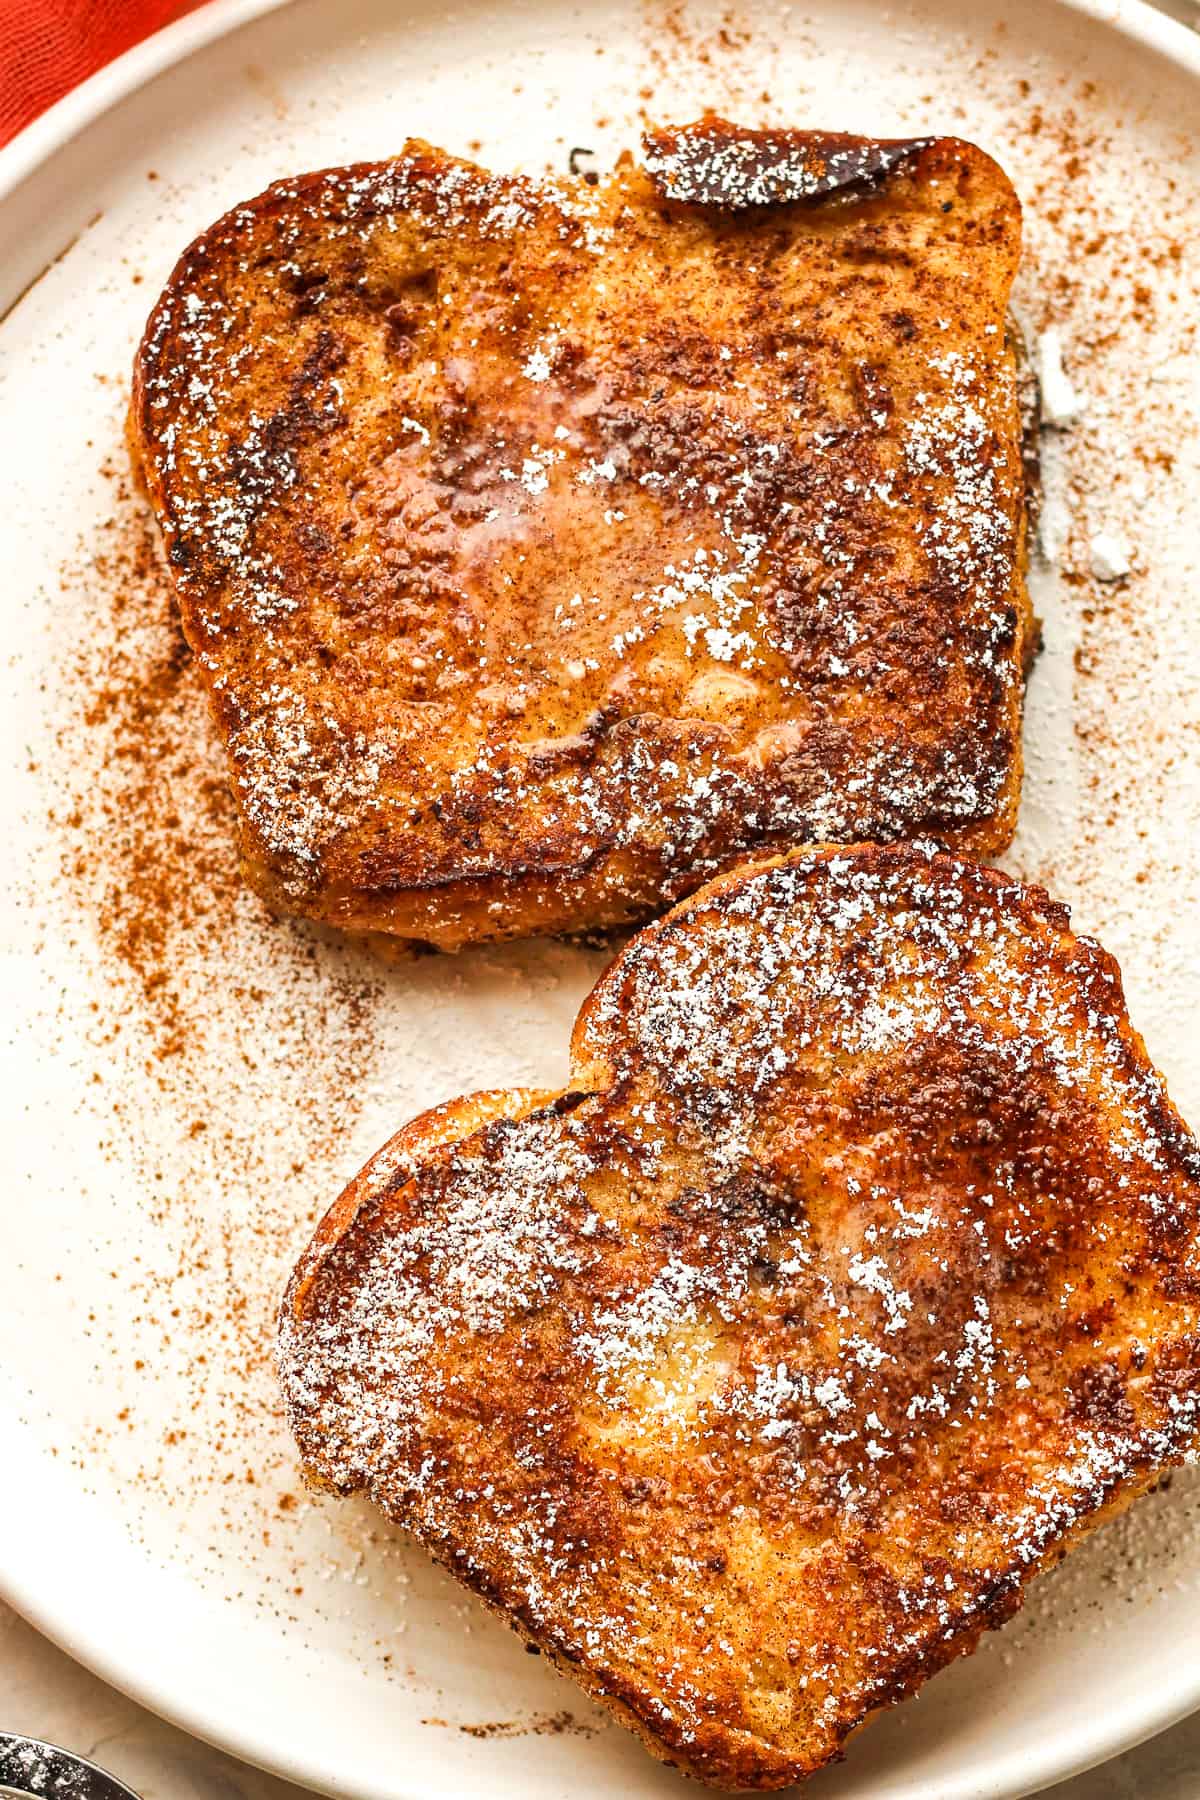 A plate of brioche French toast.